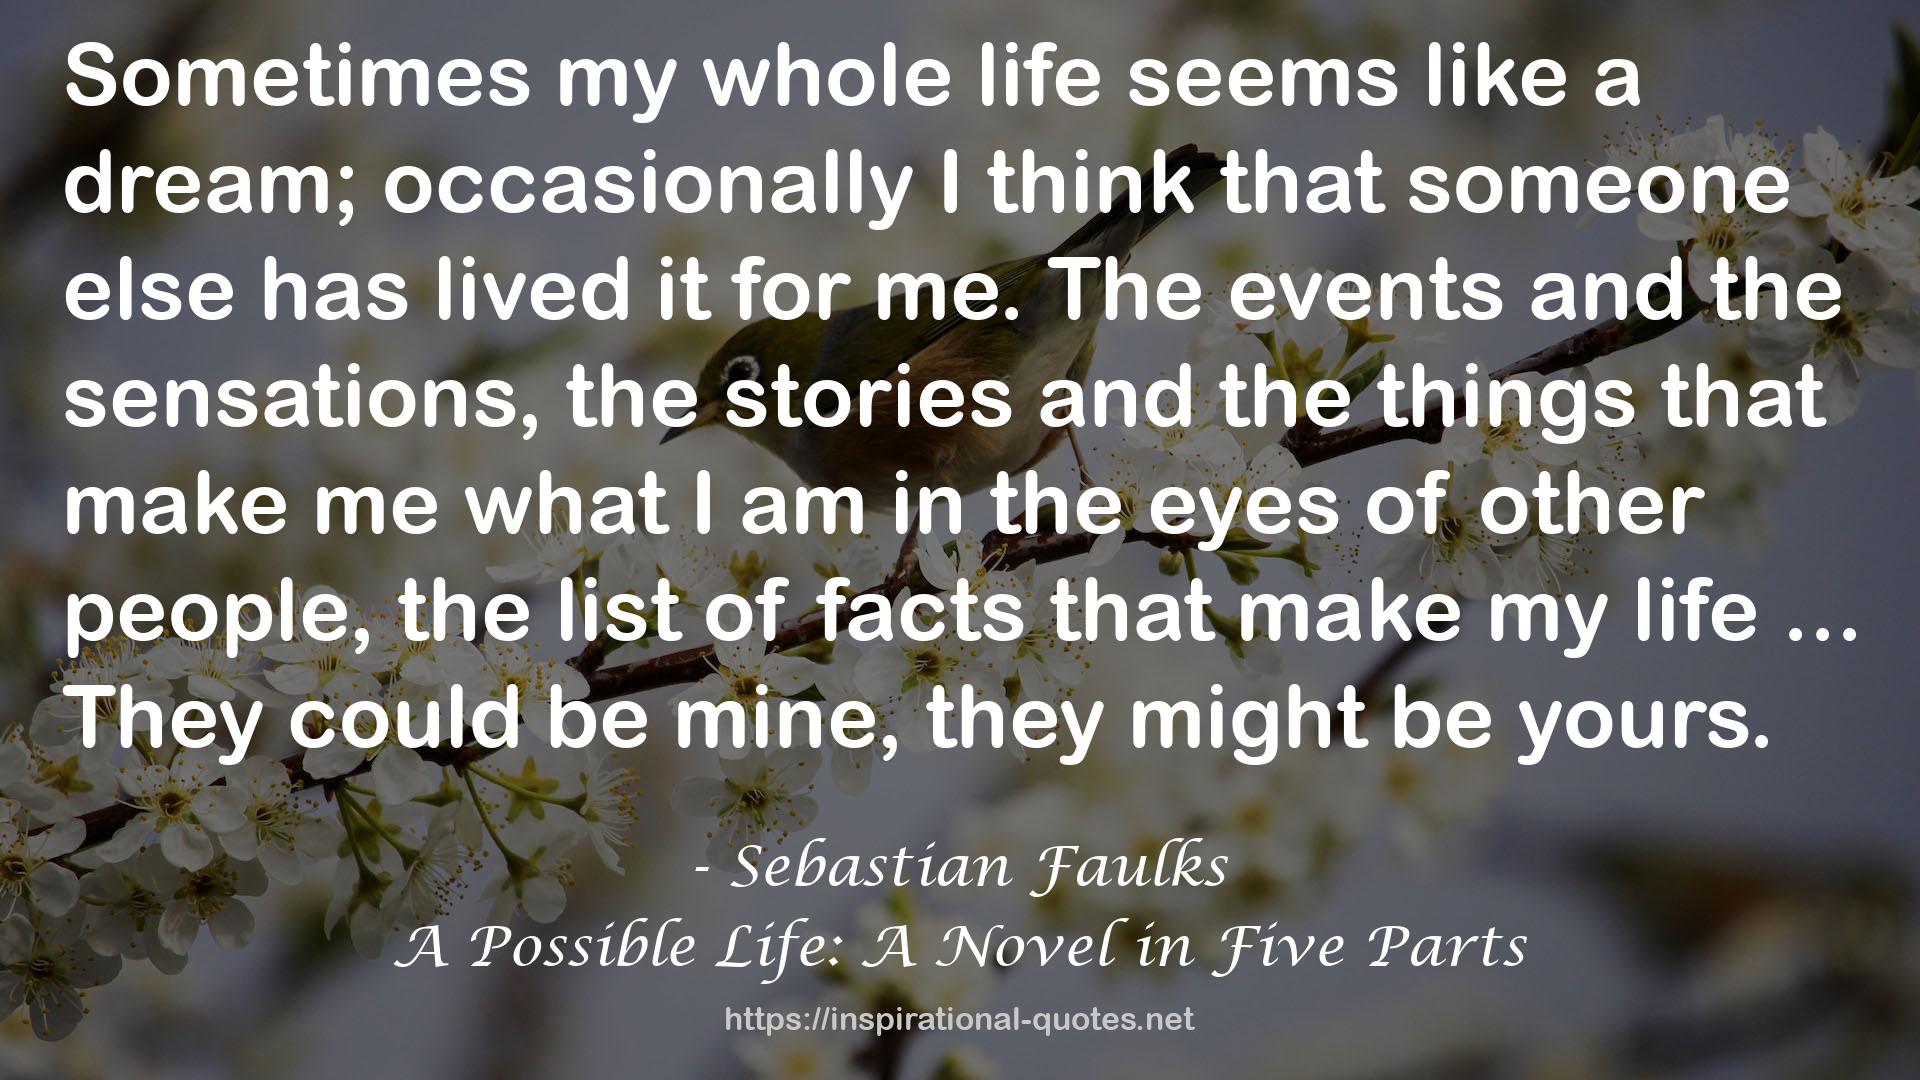 A Possible Life: A Novel in Five Parts QUOTES